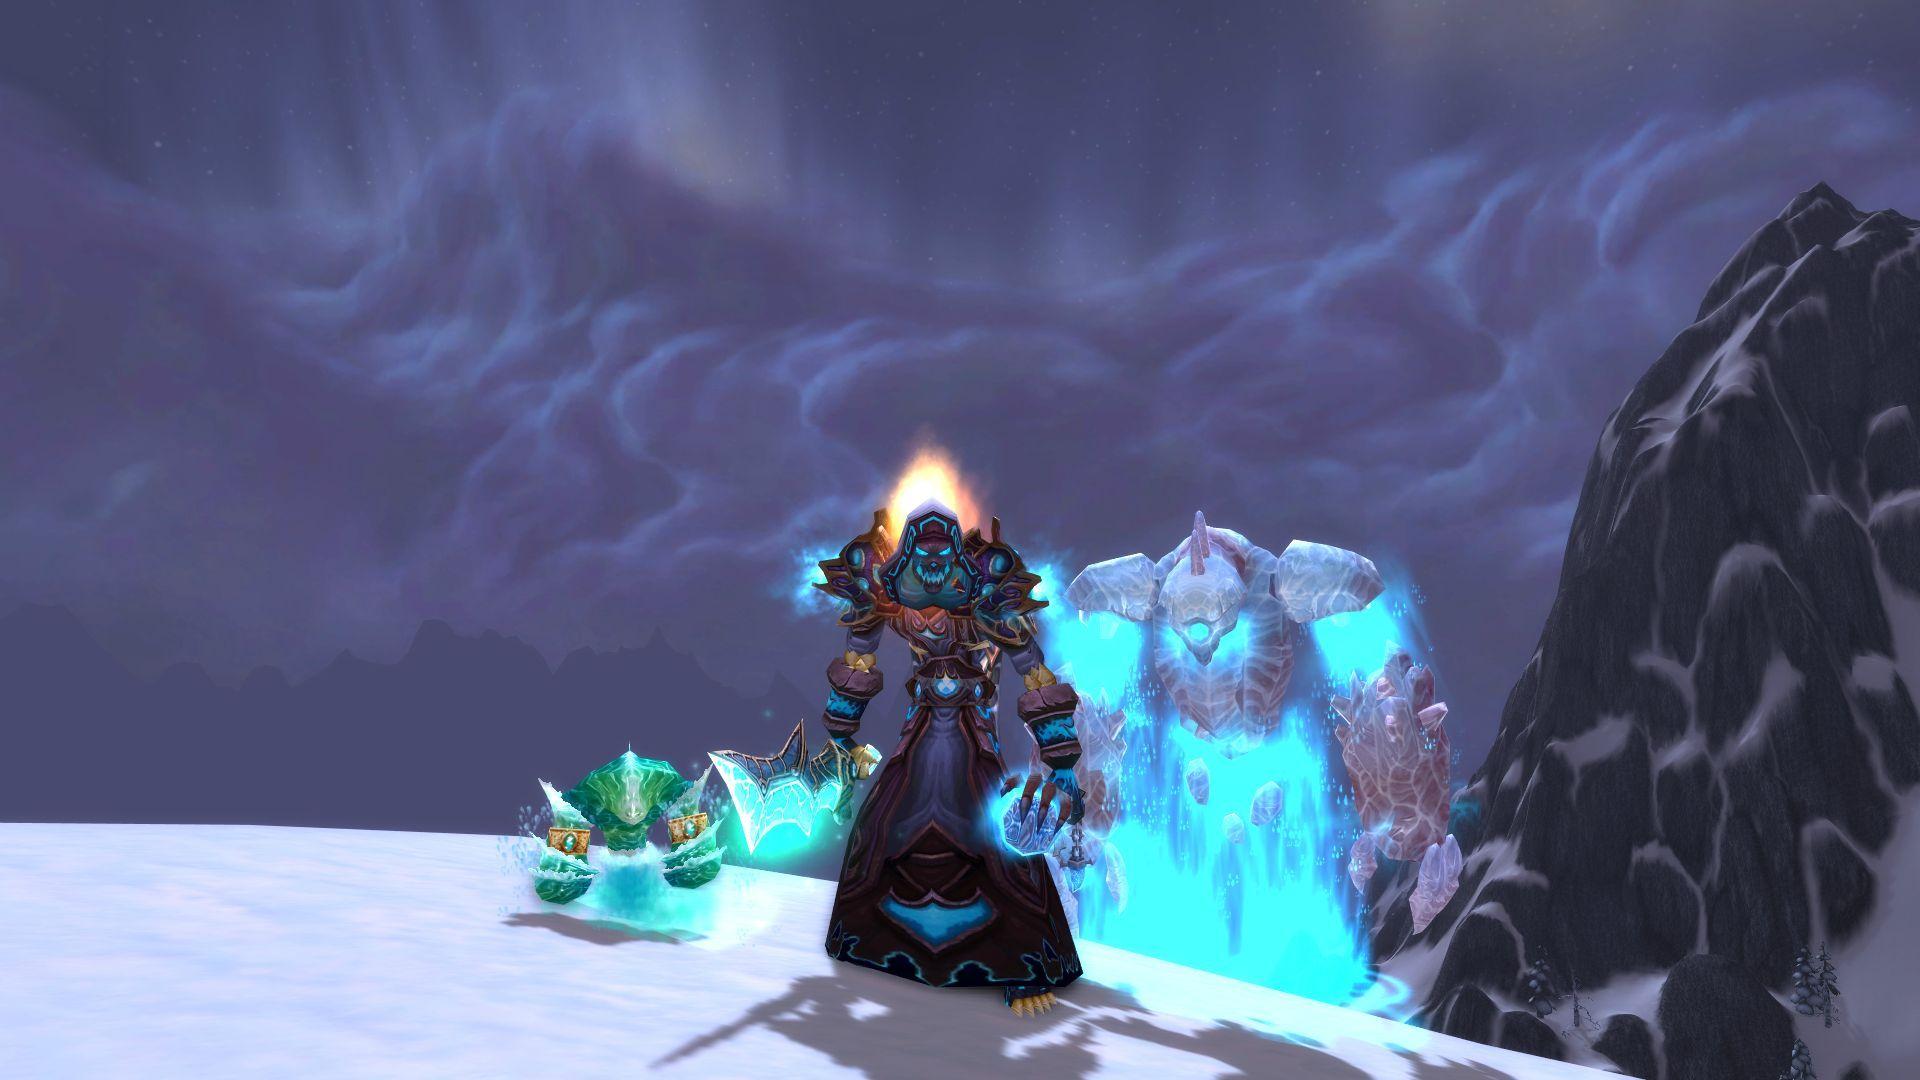 My frost mage xmog, structured around the Firelord tier set